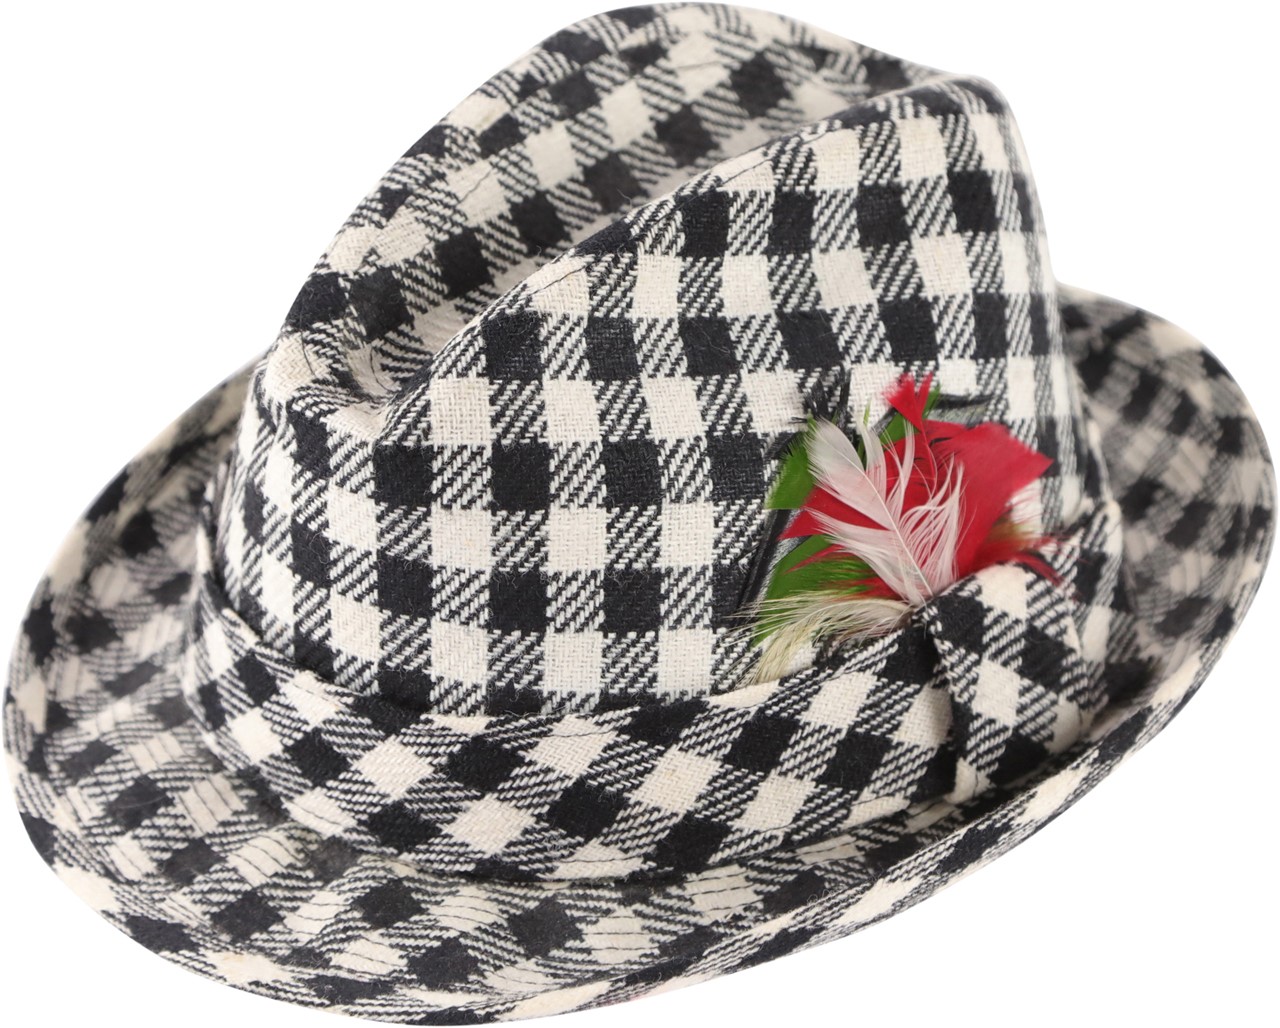 - Bear Bryant Personally Owned and Worn Houndstooth Hat from The Bryant Family (Cherry Bryant LOA)